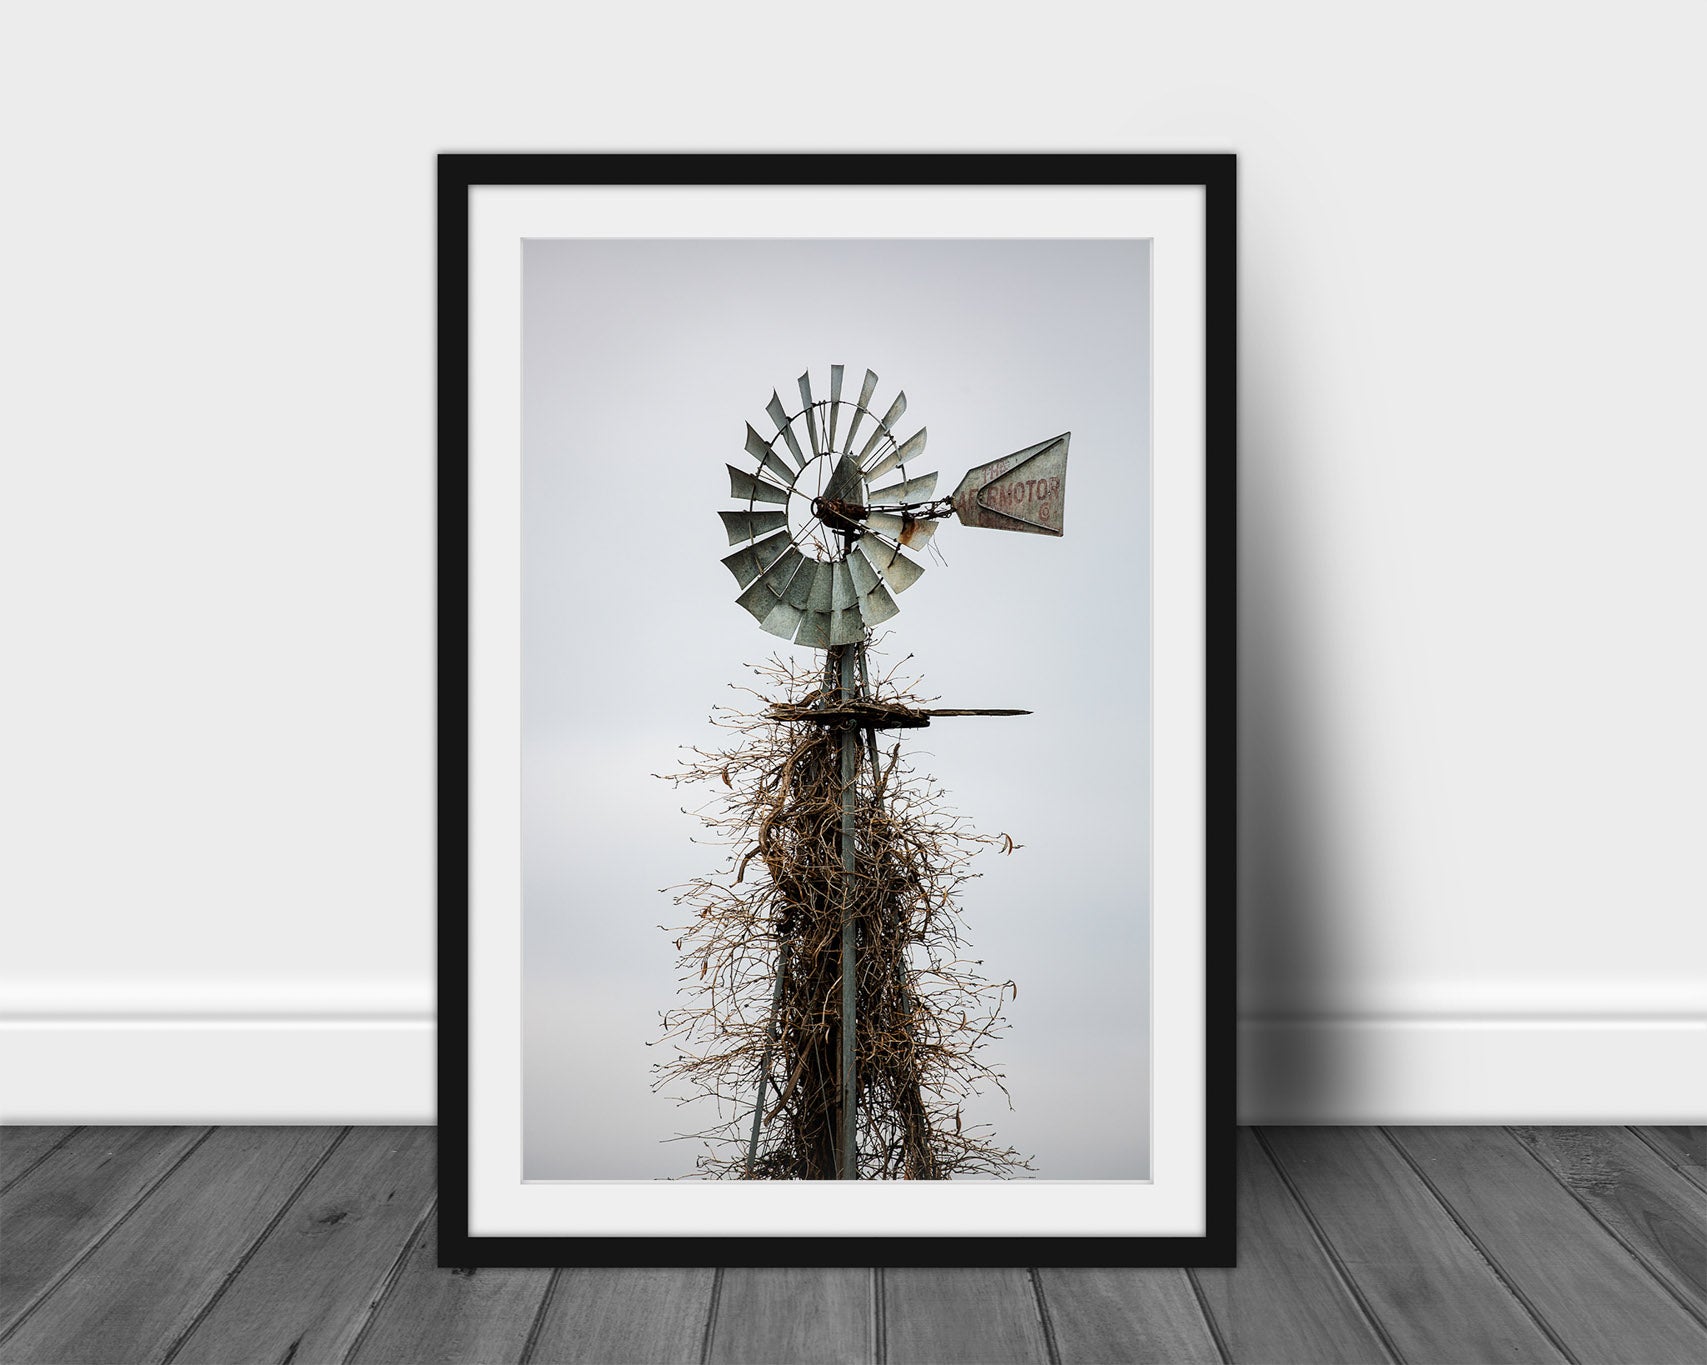 Framed and matted country photography print of an old Aermotor windmill covered in vines on an abandoned farm in Oklahoma by Sean Ramsey of Southern Plains Photography.